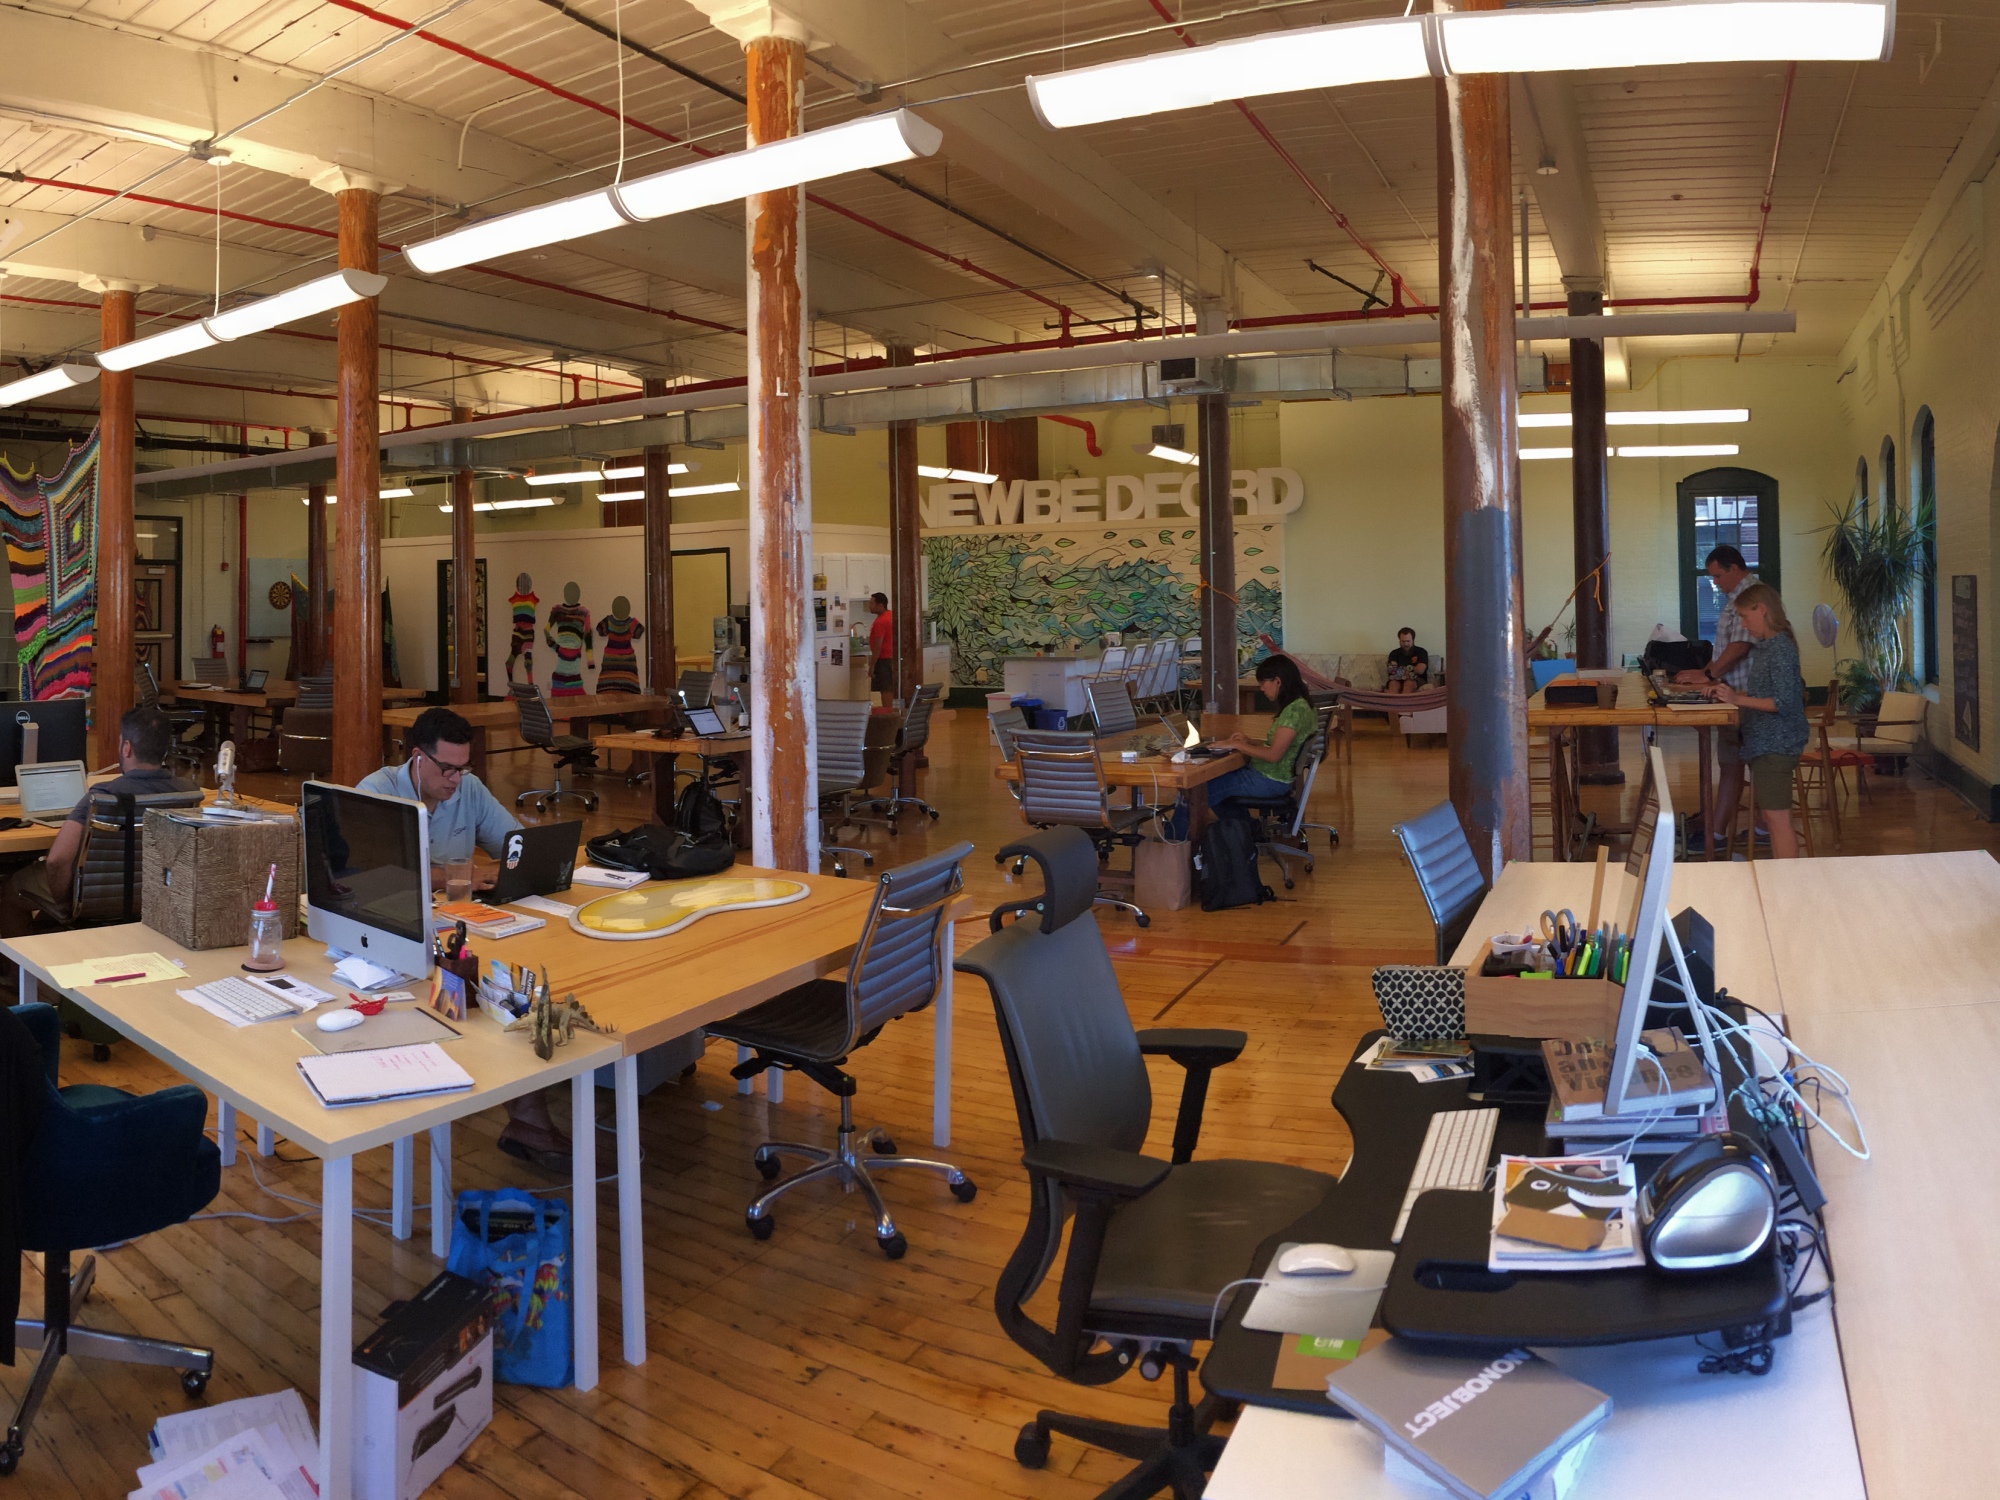 Groundwork co-working space in New Bedford, MA